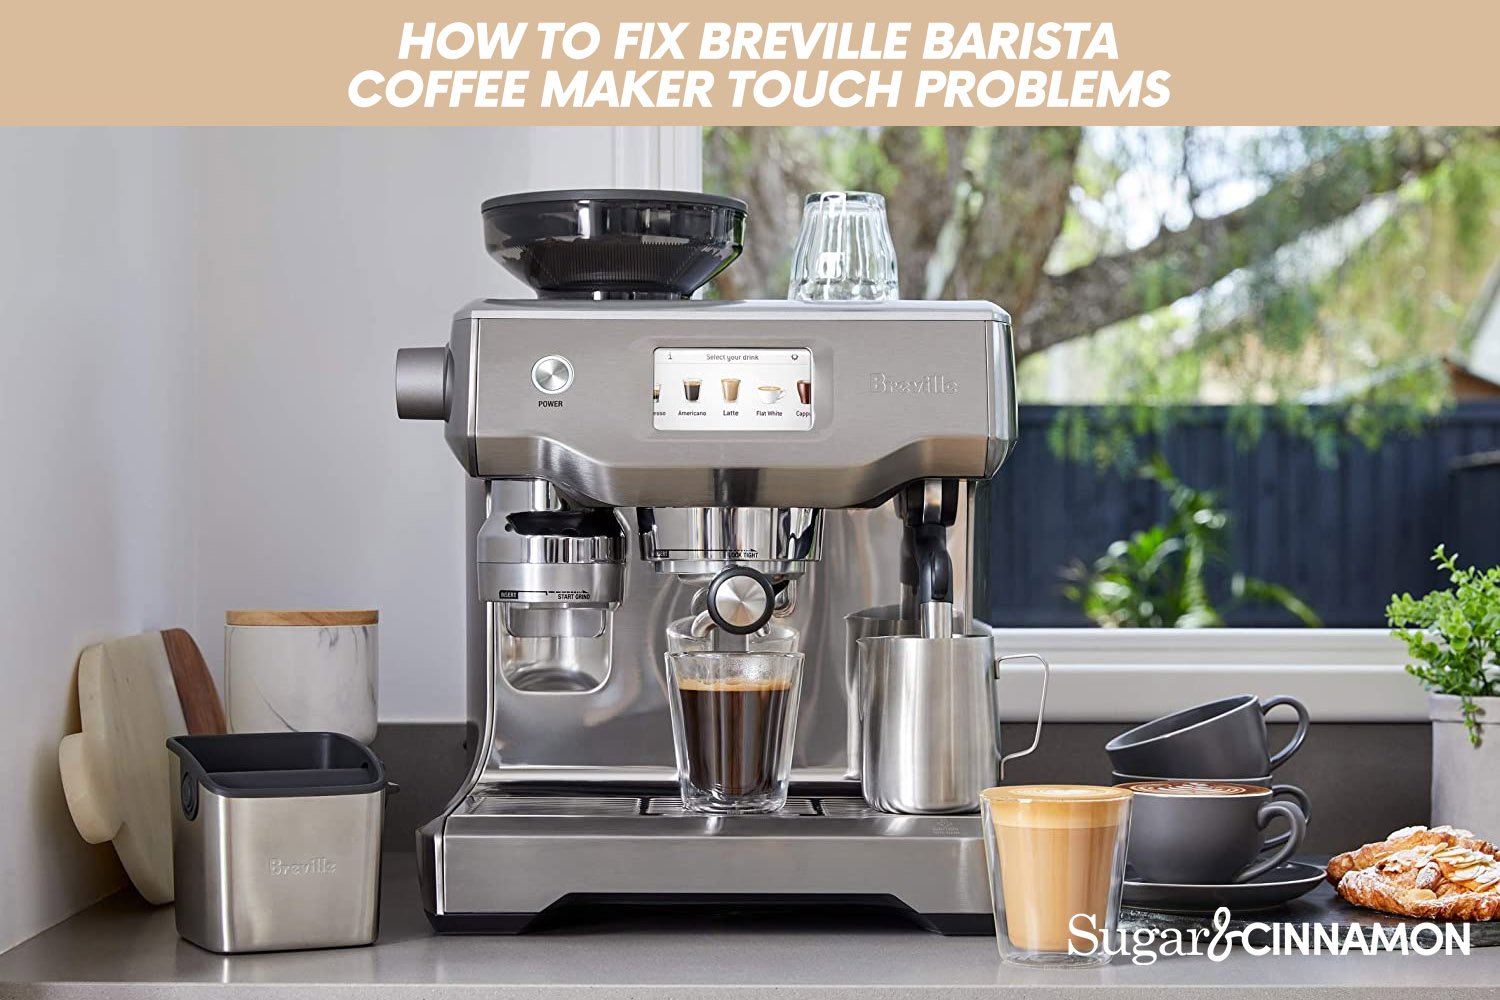 How to Fix Breville Barista Coffee Maker Touch Problems